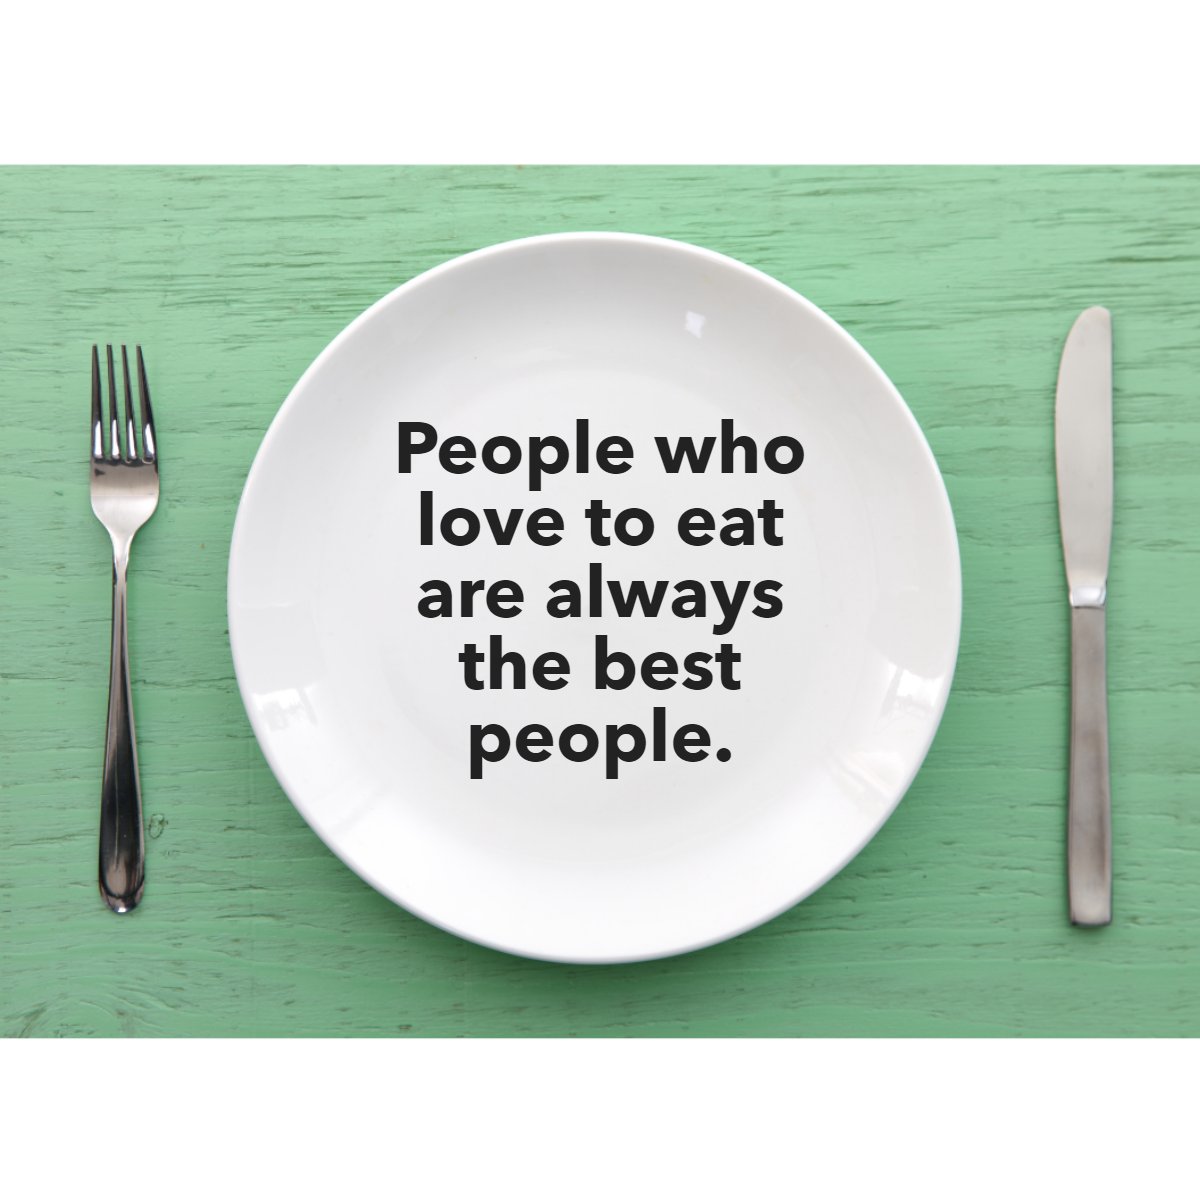 'People who love to eat are always the best people.'  
— Julia Child 😊

#goodfood #goodpeople #goodmoodfood #goodtimeswithgoodpeople #foodisgood #goodtimeswithgreatpeople #goodfoodgoodlife